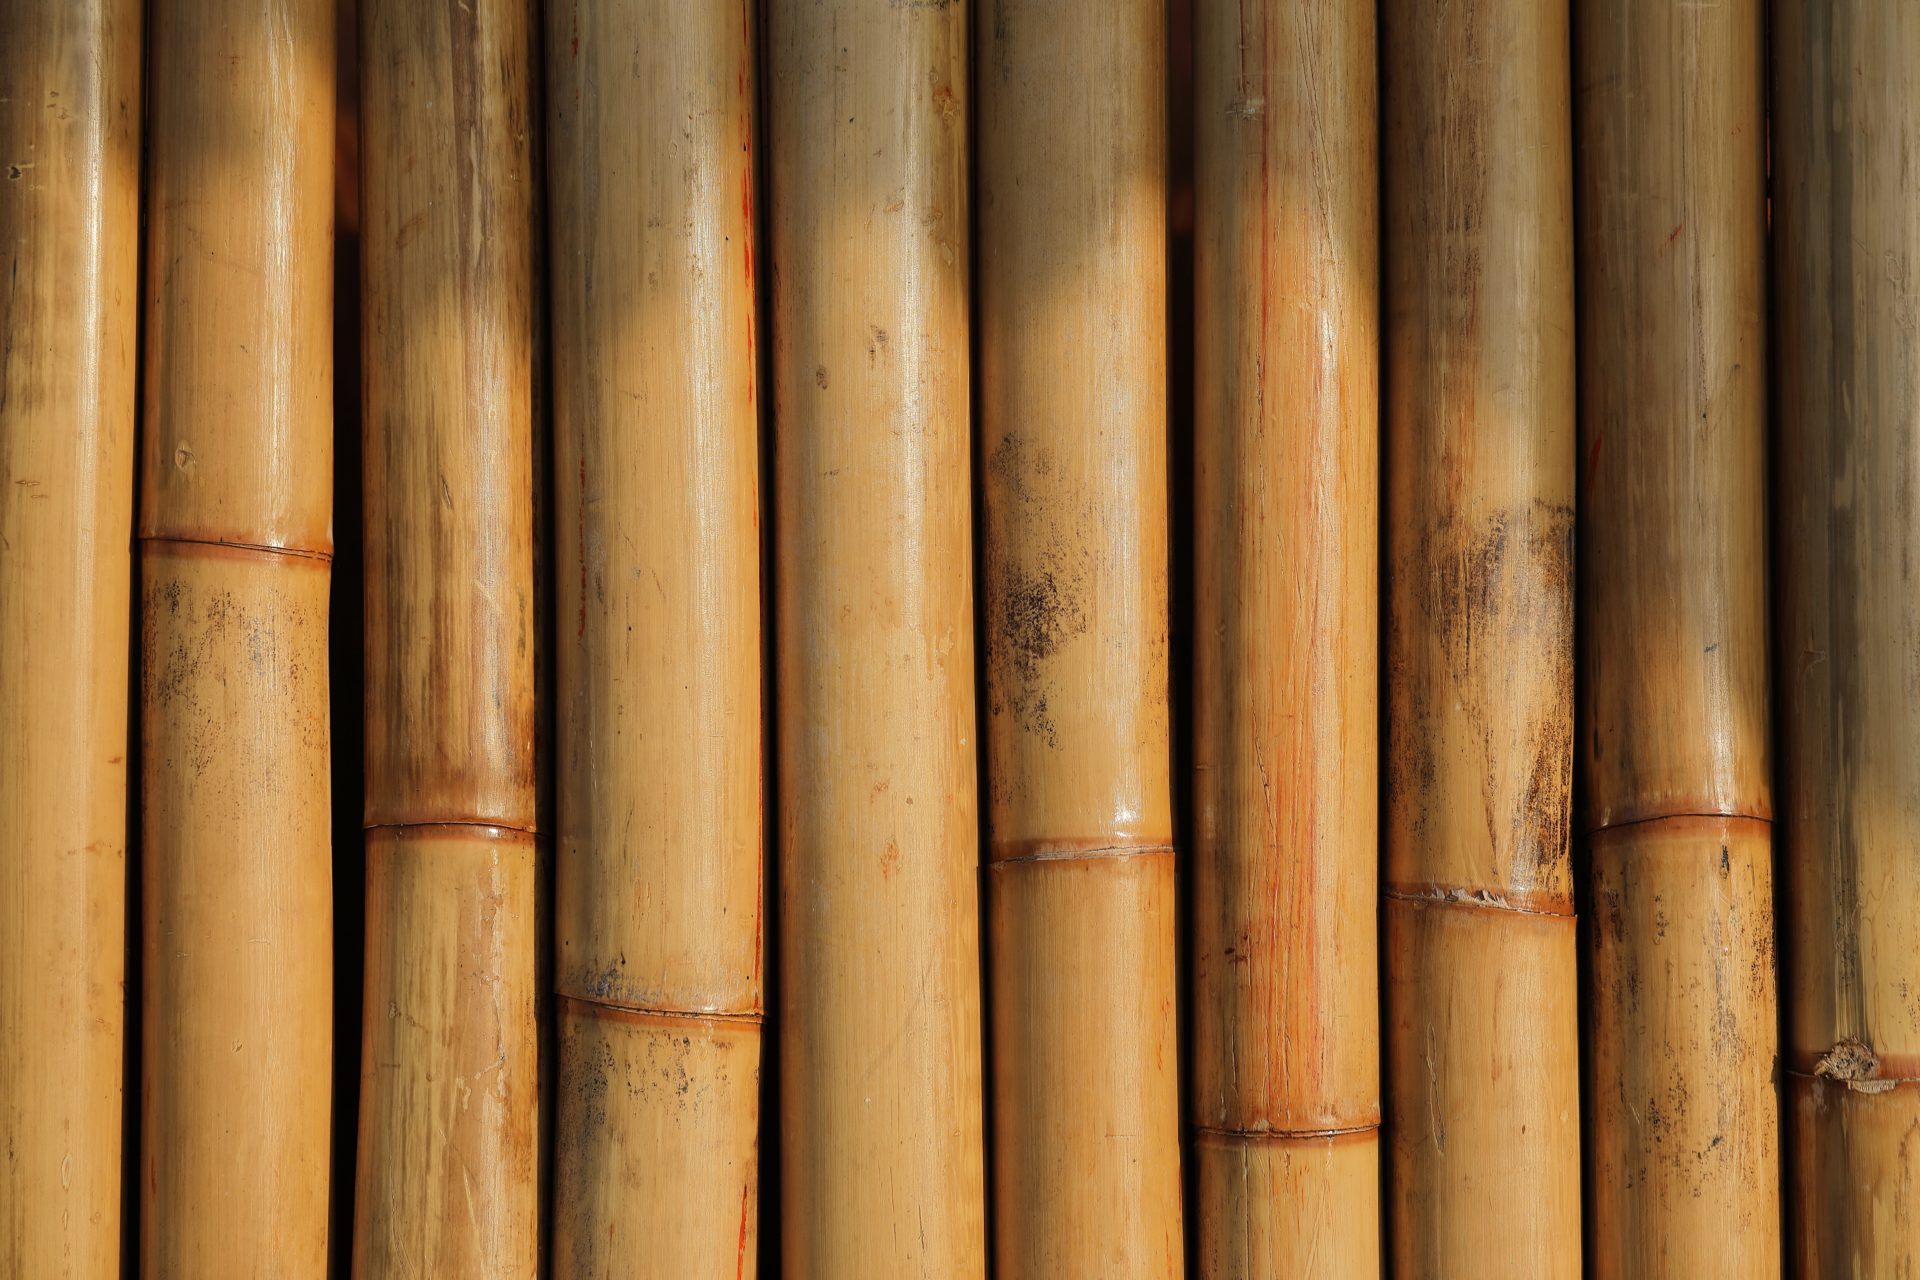 bamboo products